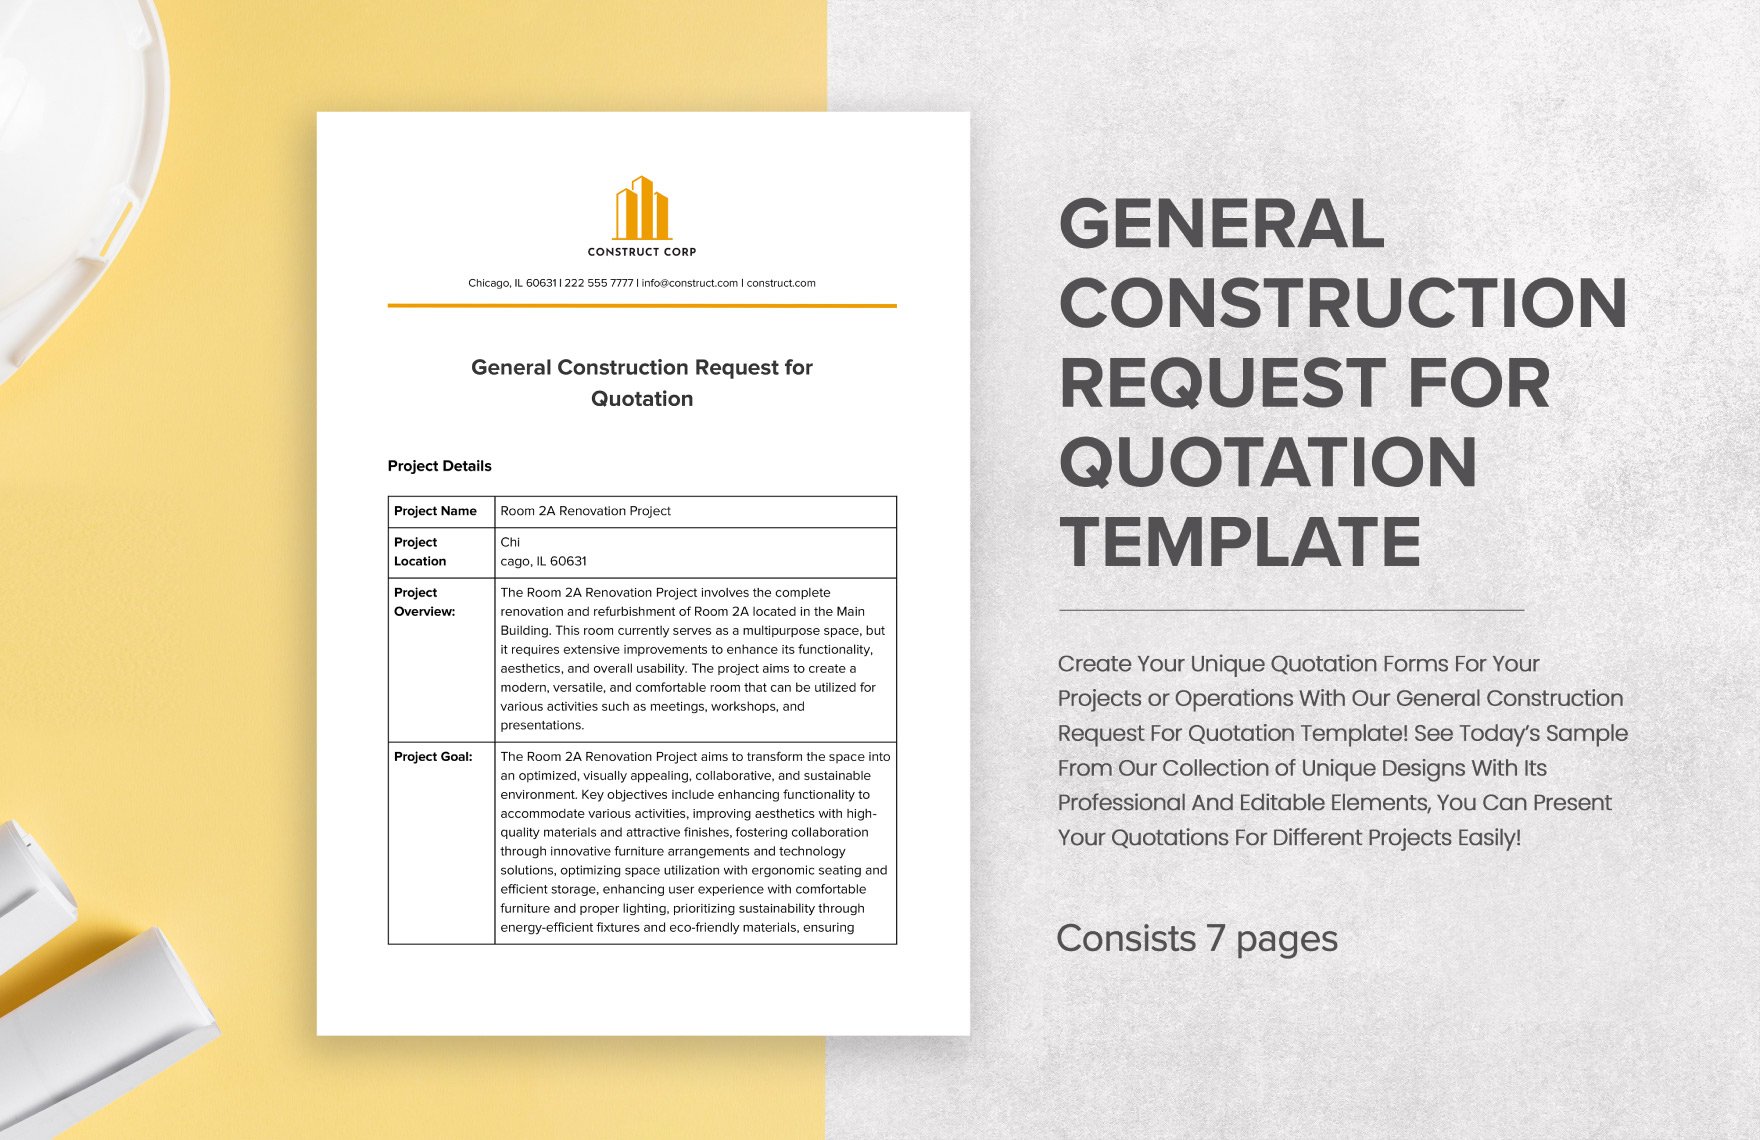 General Construction Request for Quotation Template 